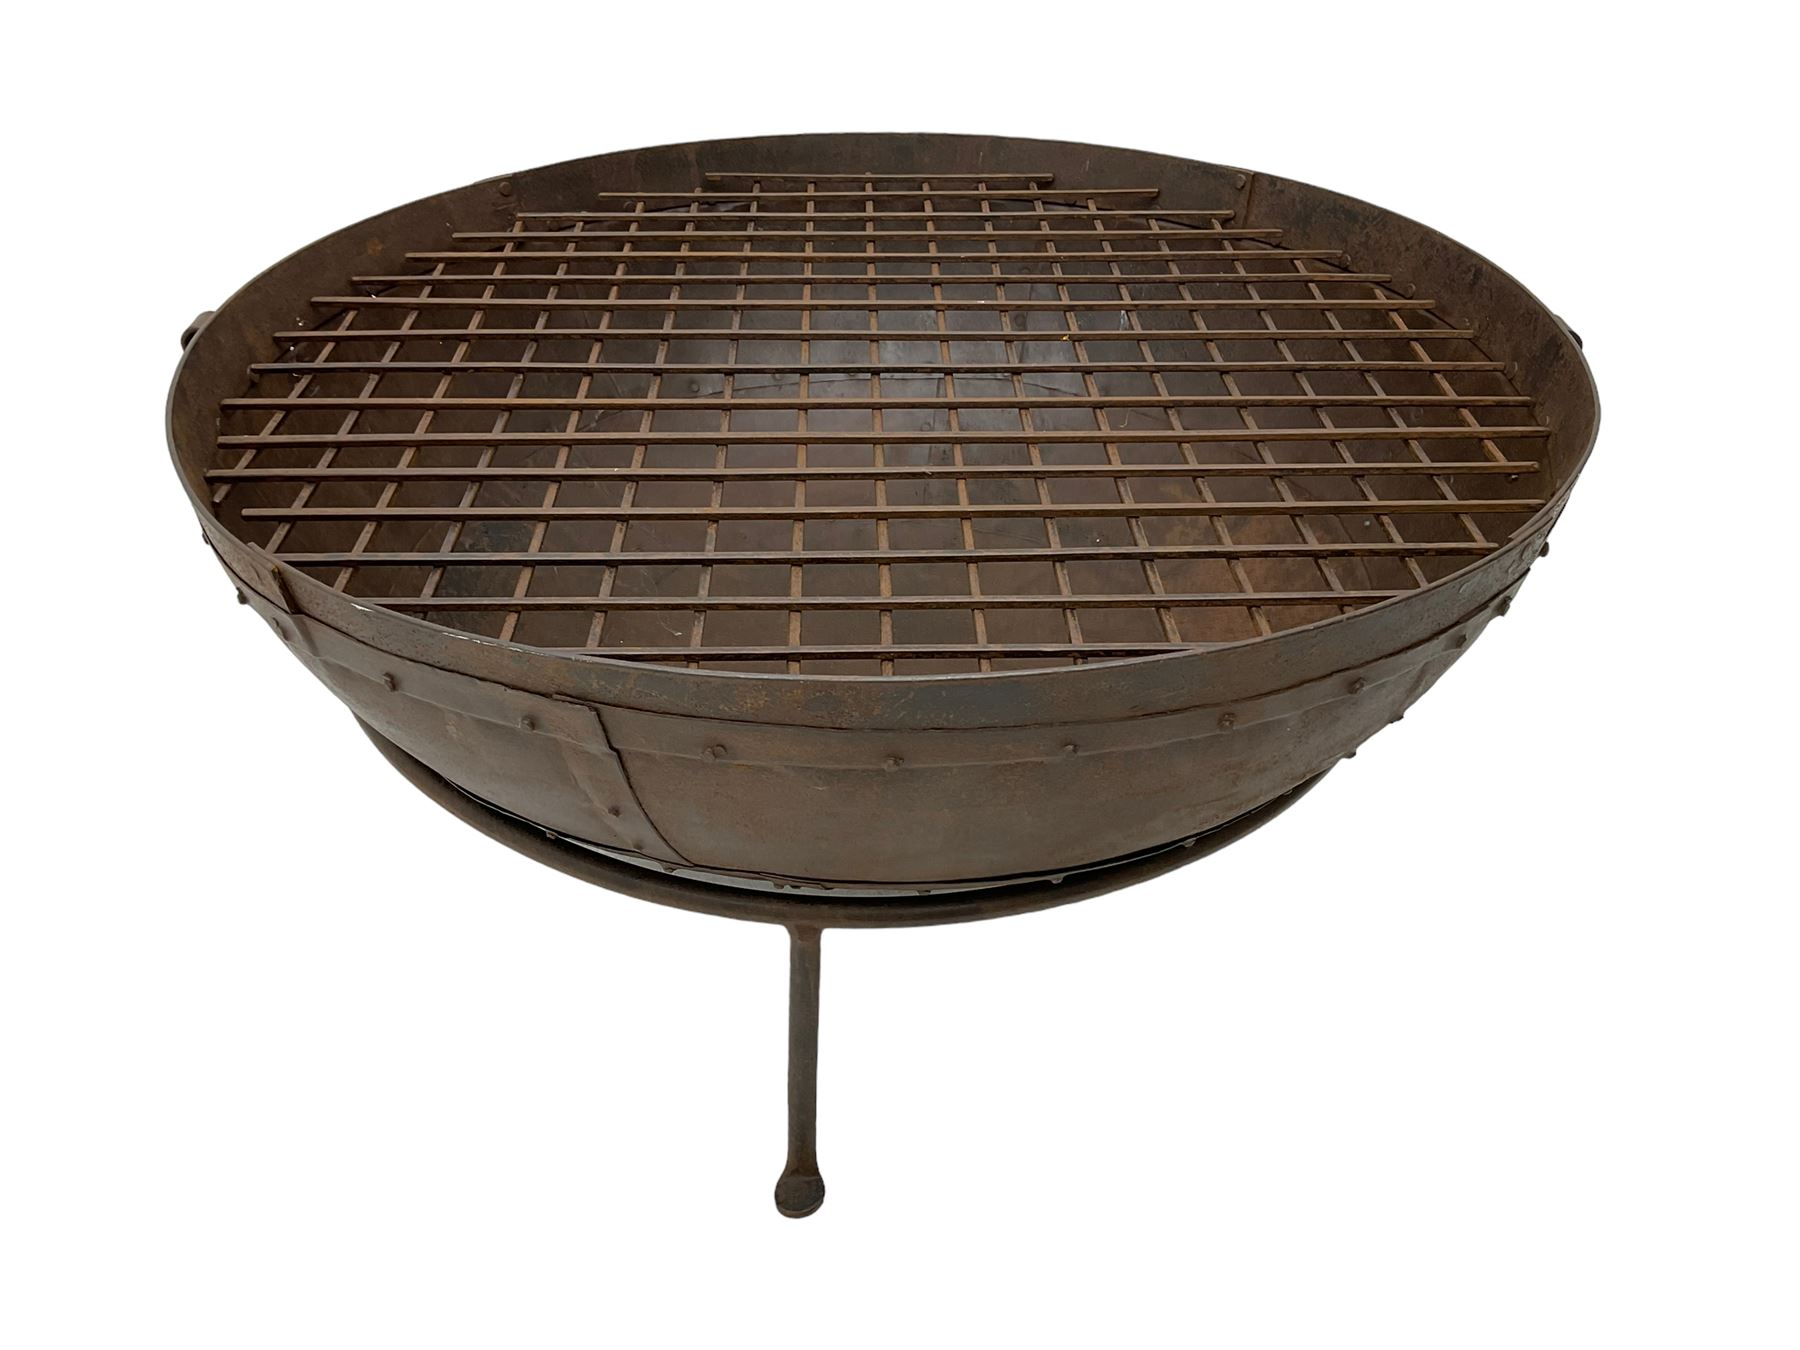 Circular riveted iron fire pit - Image 7 of 7